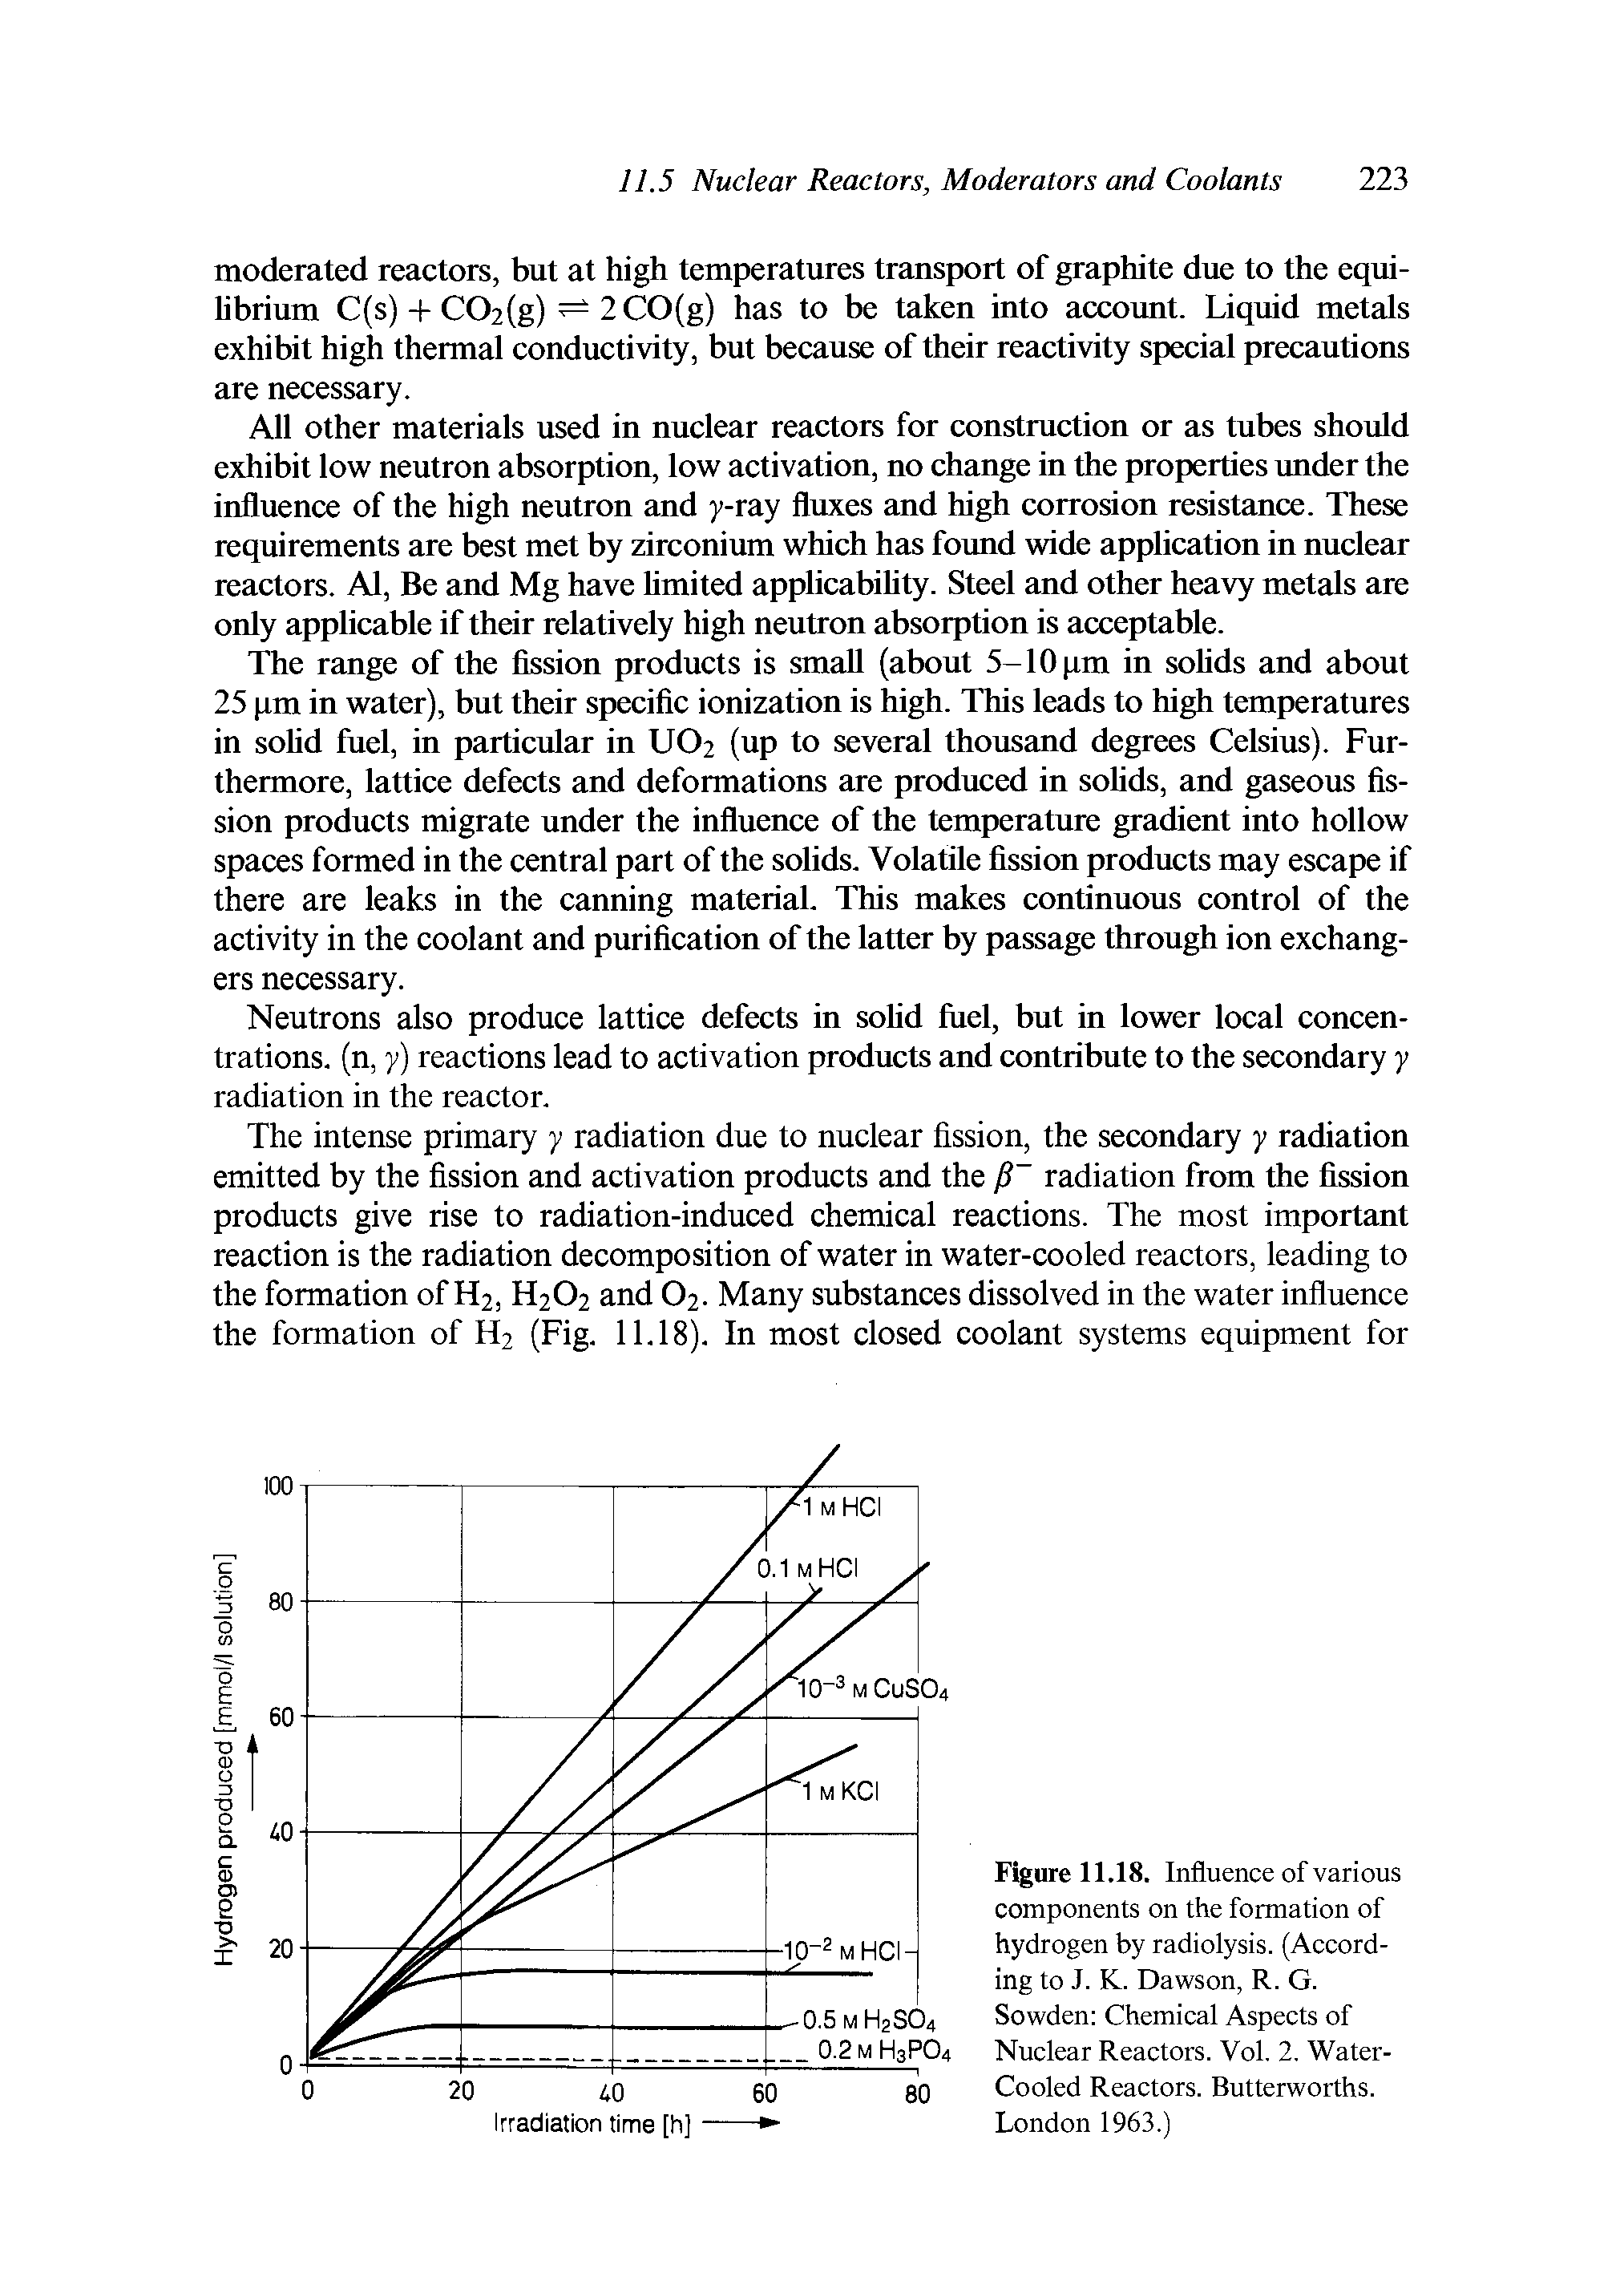 Figure 11.18. Influence of various components on the formation of hydrogen by radiolysis. (According to J. K. Dawson, R. G. Sowden Chemical Aspects of Nuclear Reactors. Vol. 2. Water-Cooled Reactors. Butterworths. London 1963.)...